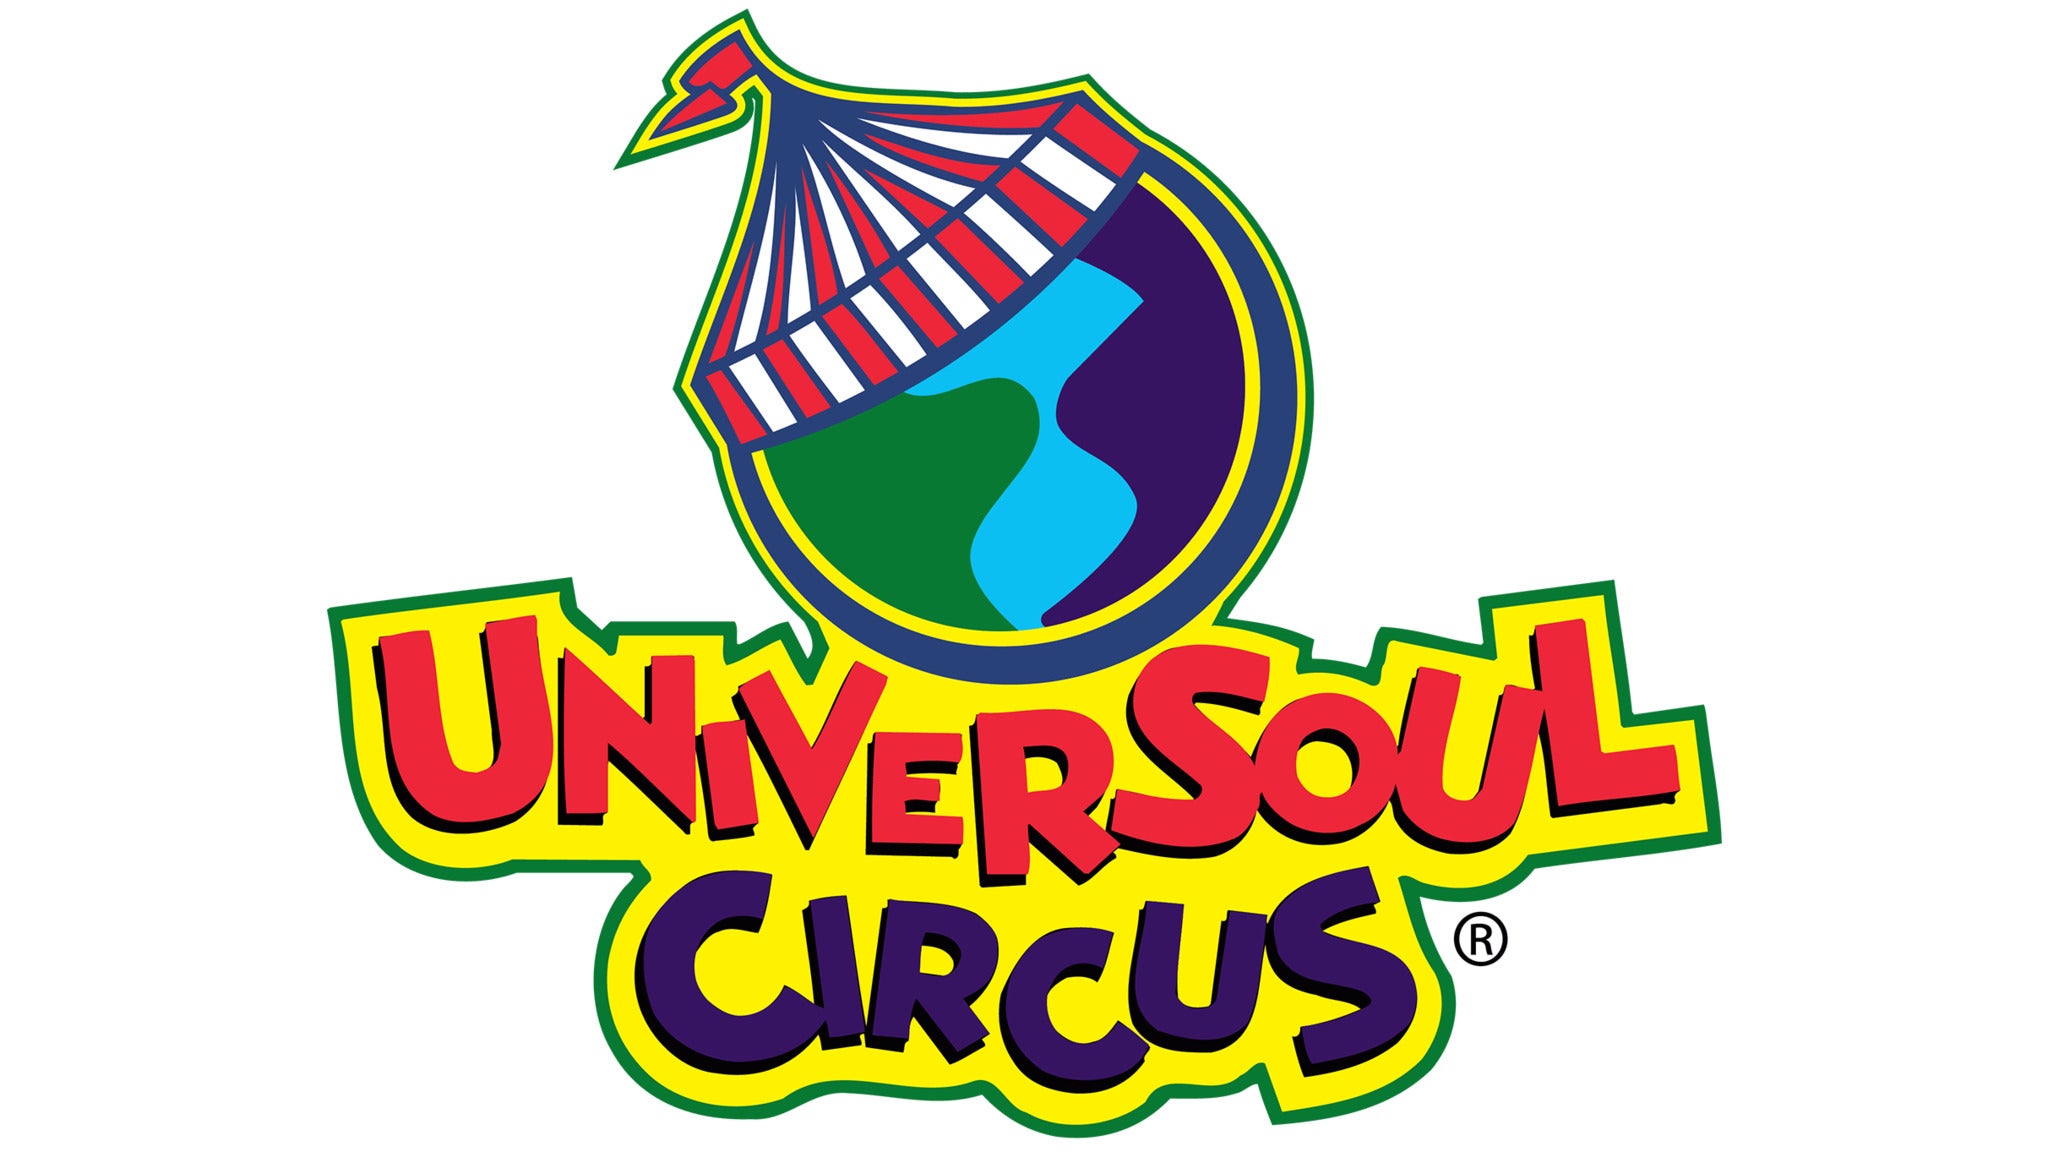 UniverSoul Circus at Universoul Circus - Hilltop Mall